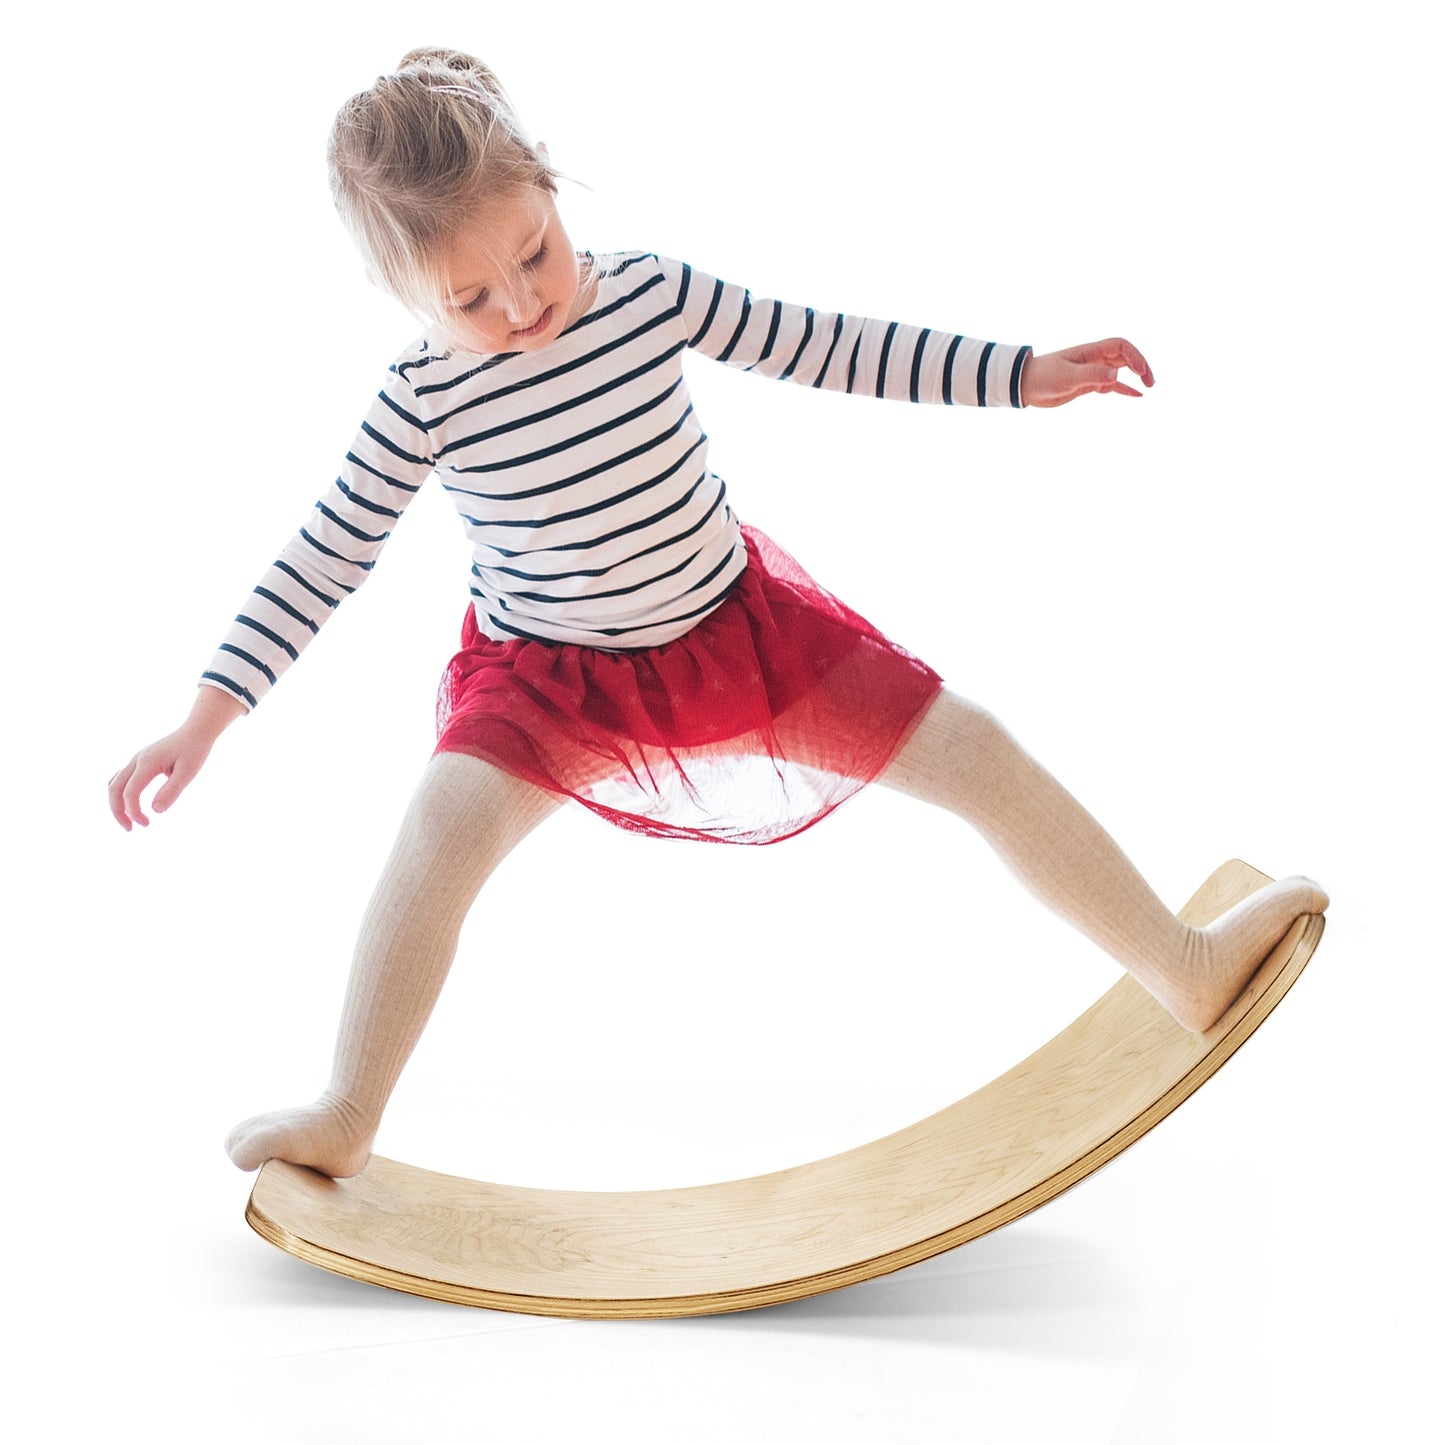 15.5 Inch Wooden Wobble Toy Balance Board-Natural